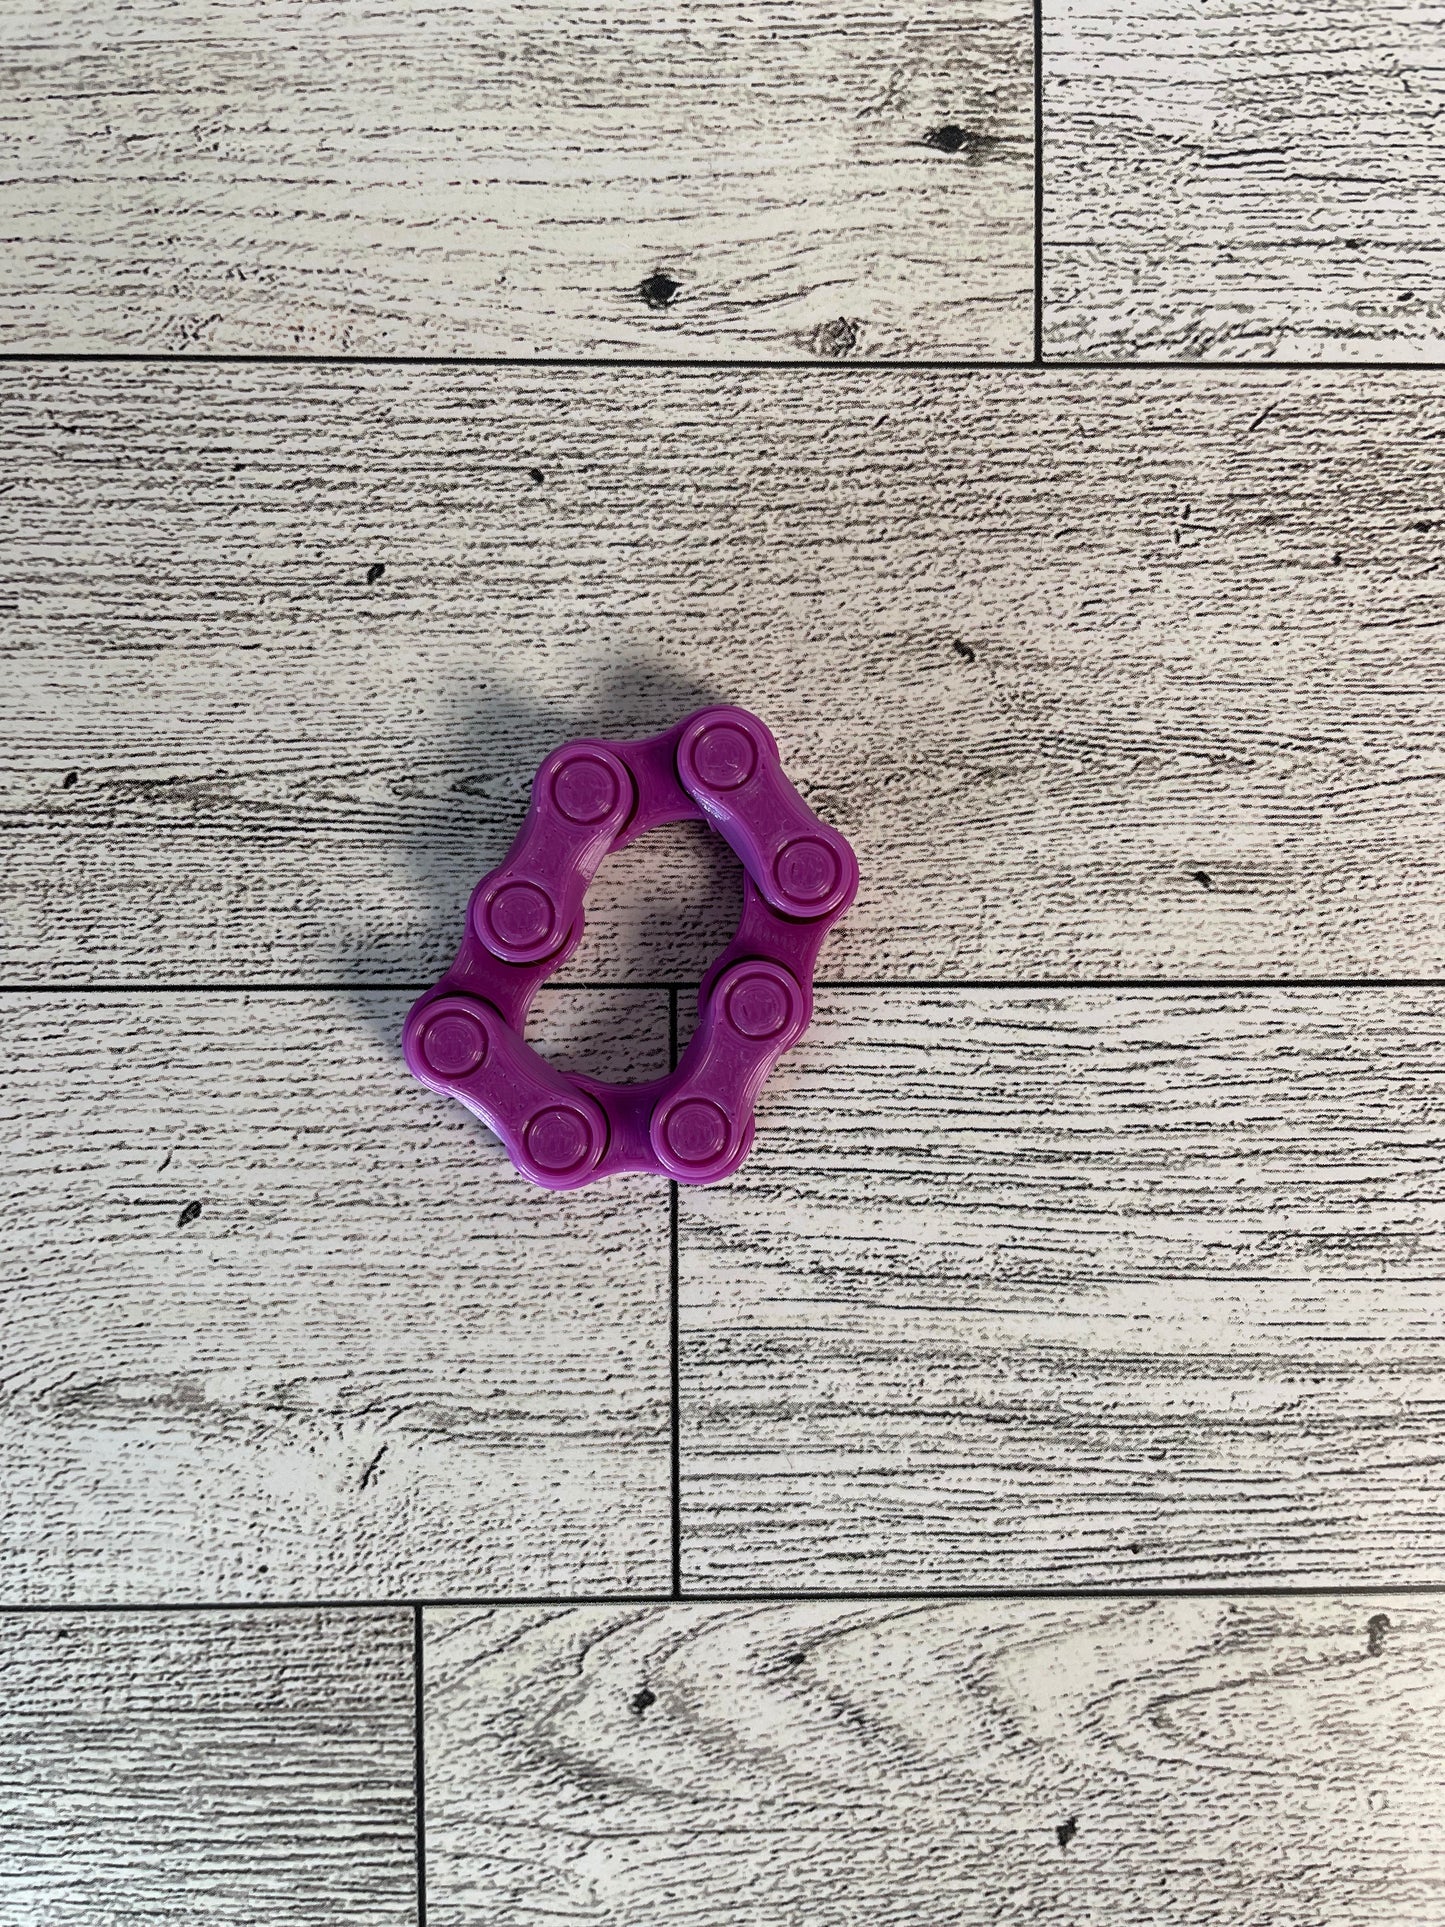 A purple chain link on a wood backdrop. The chain is arranged in a oval shape and there are four links.